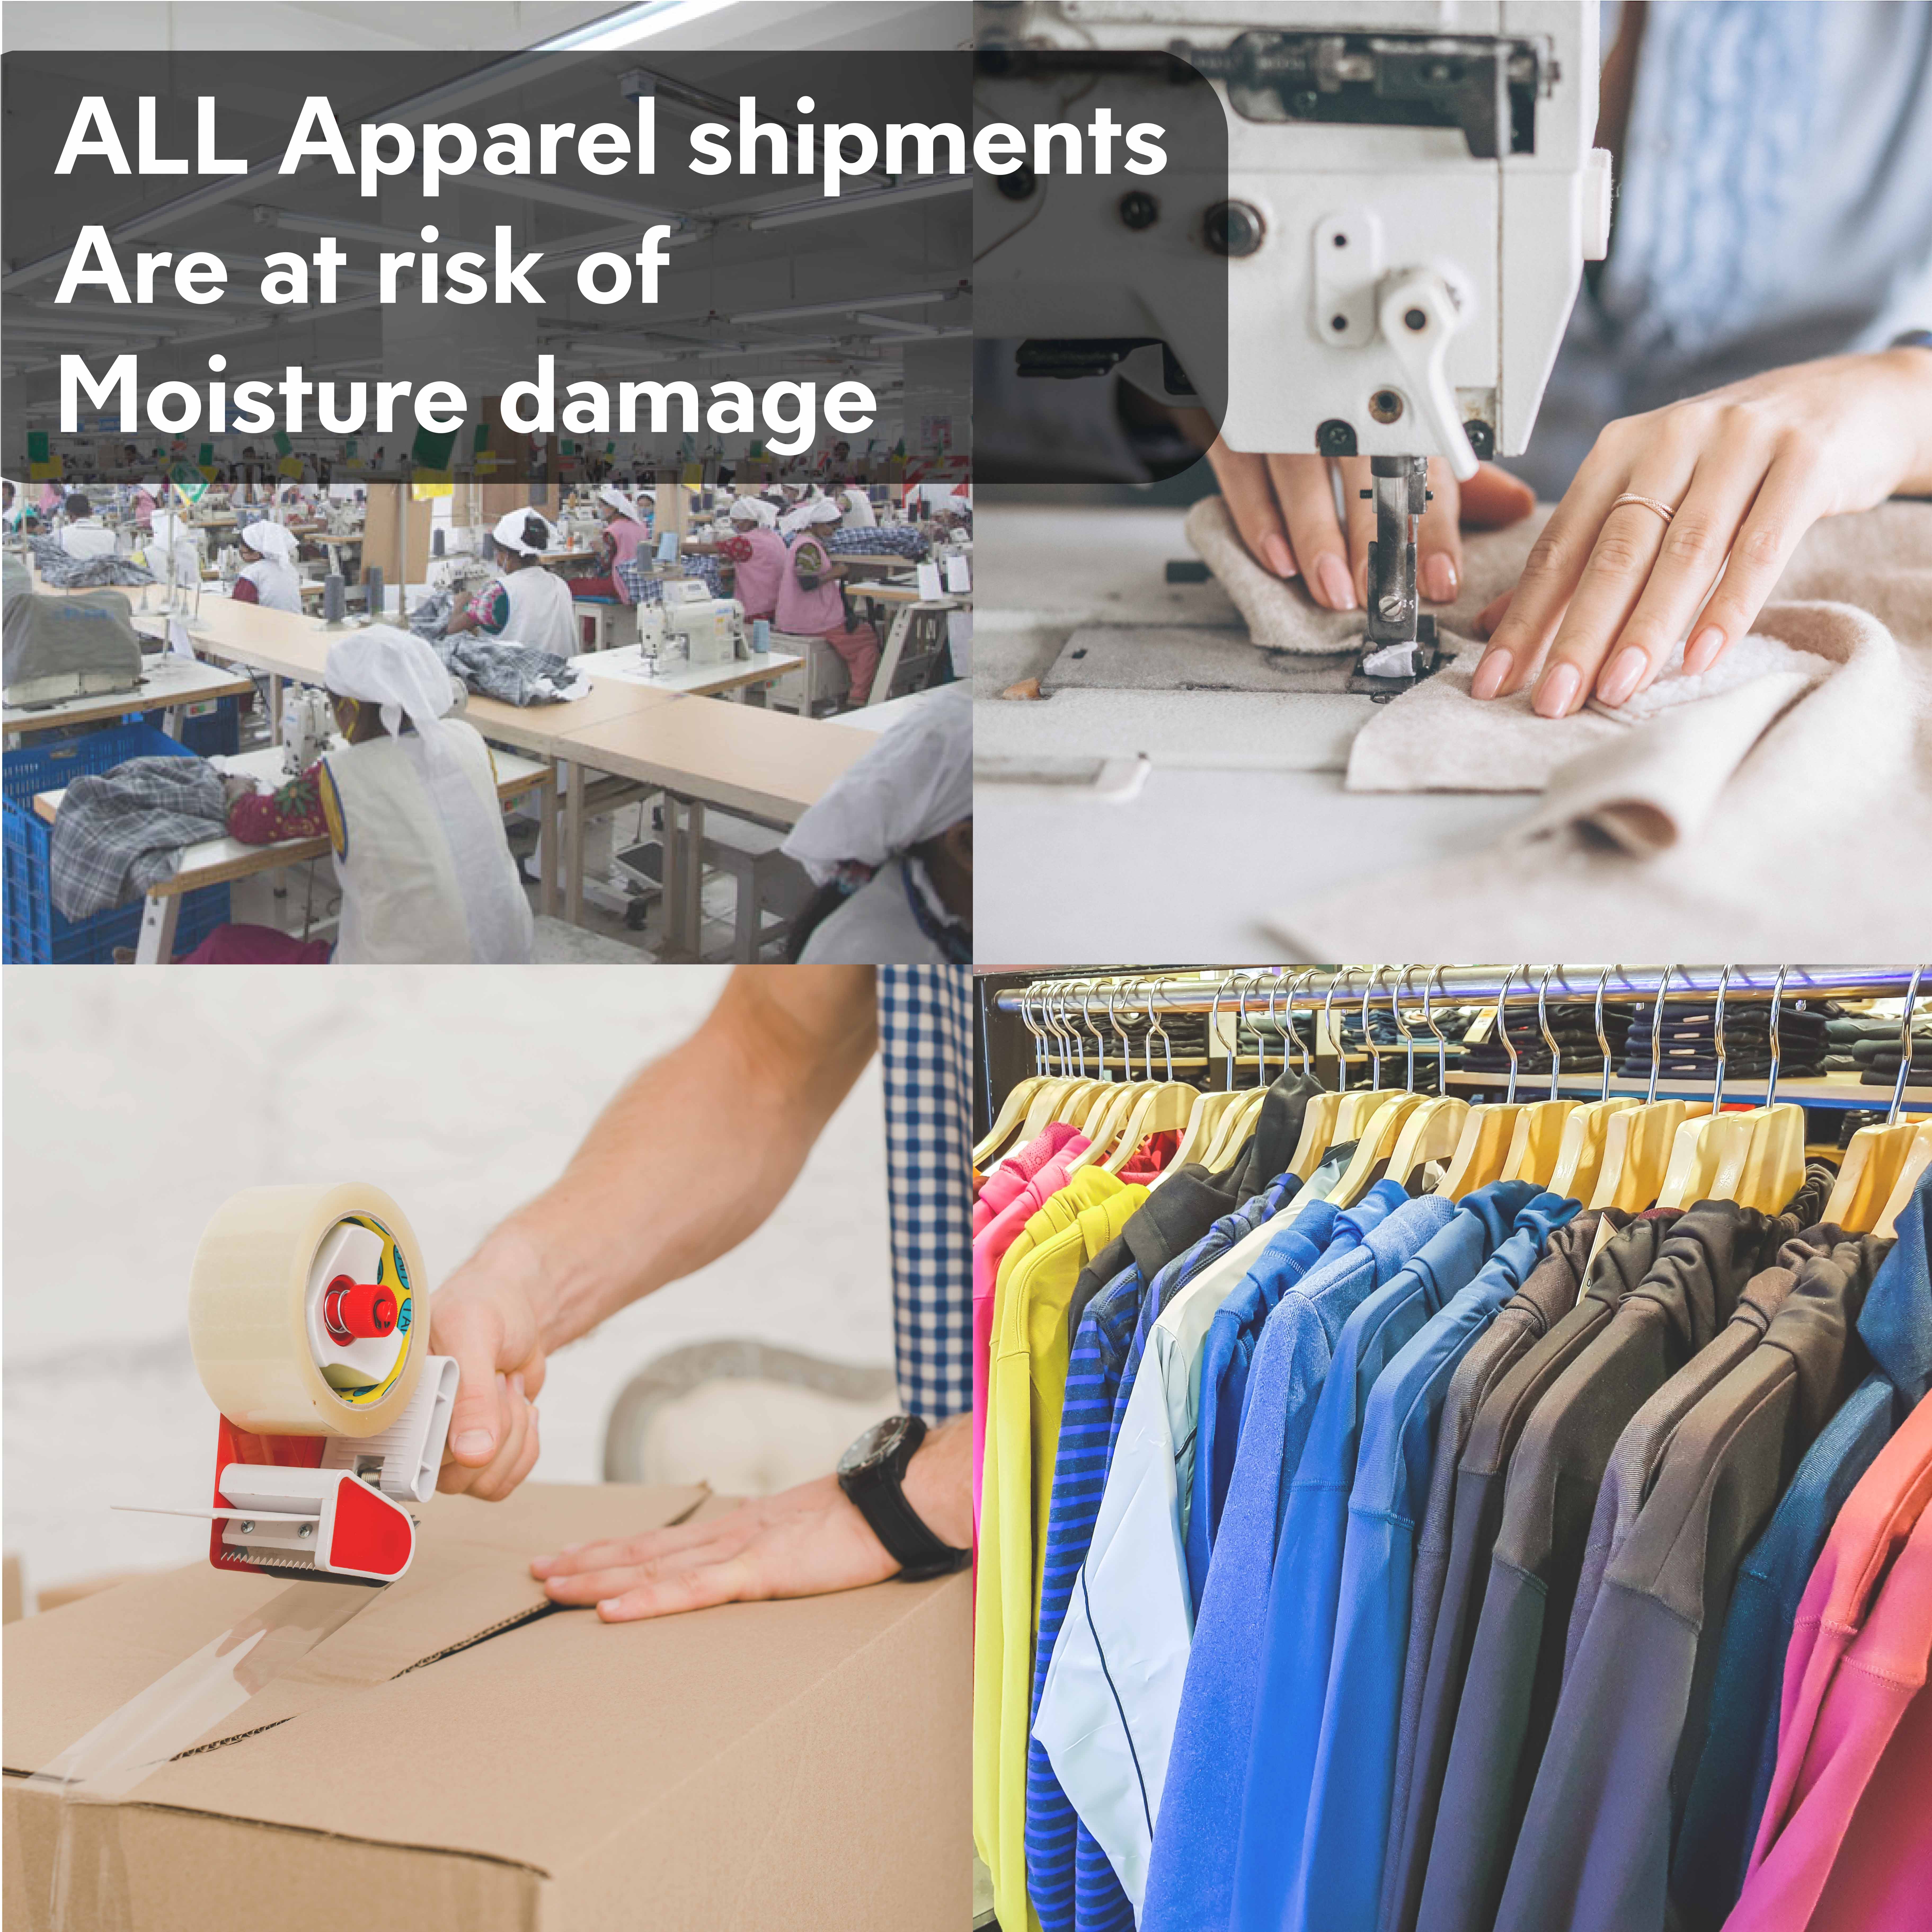 #ALL Apparel shipments are at risk of moisture damage